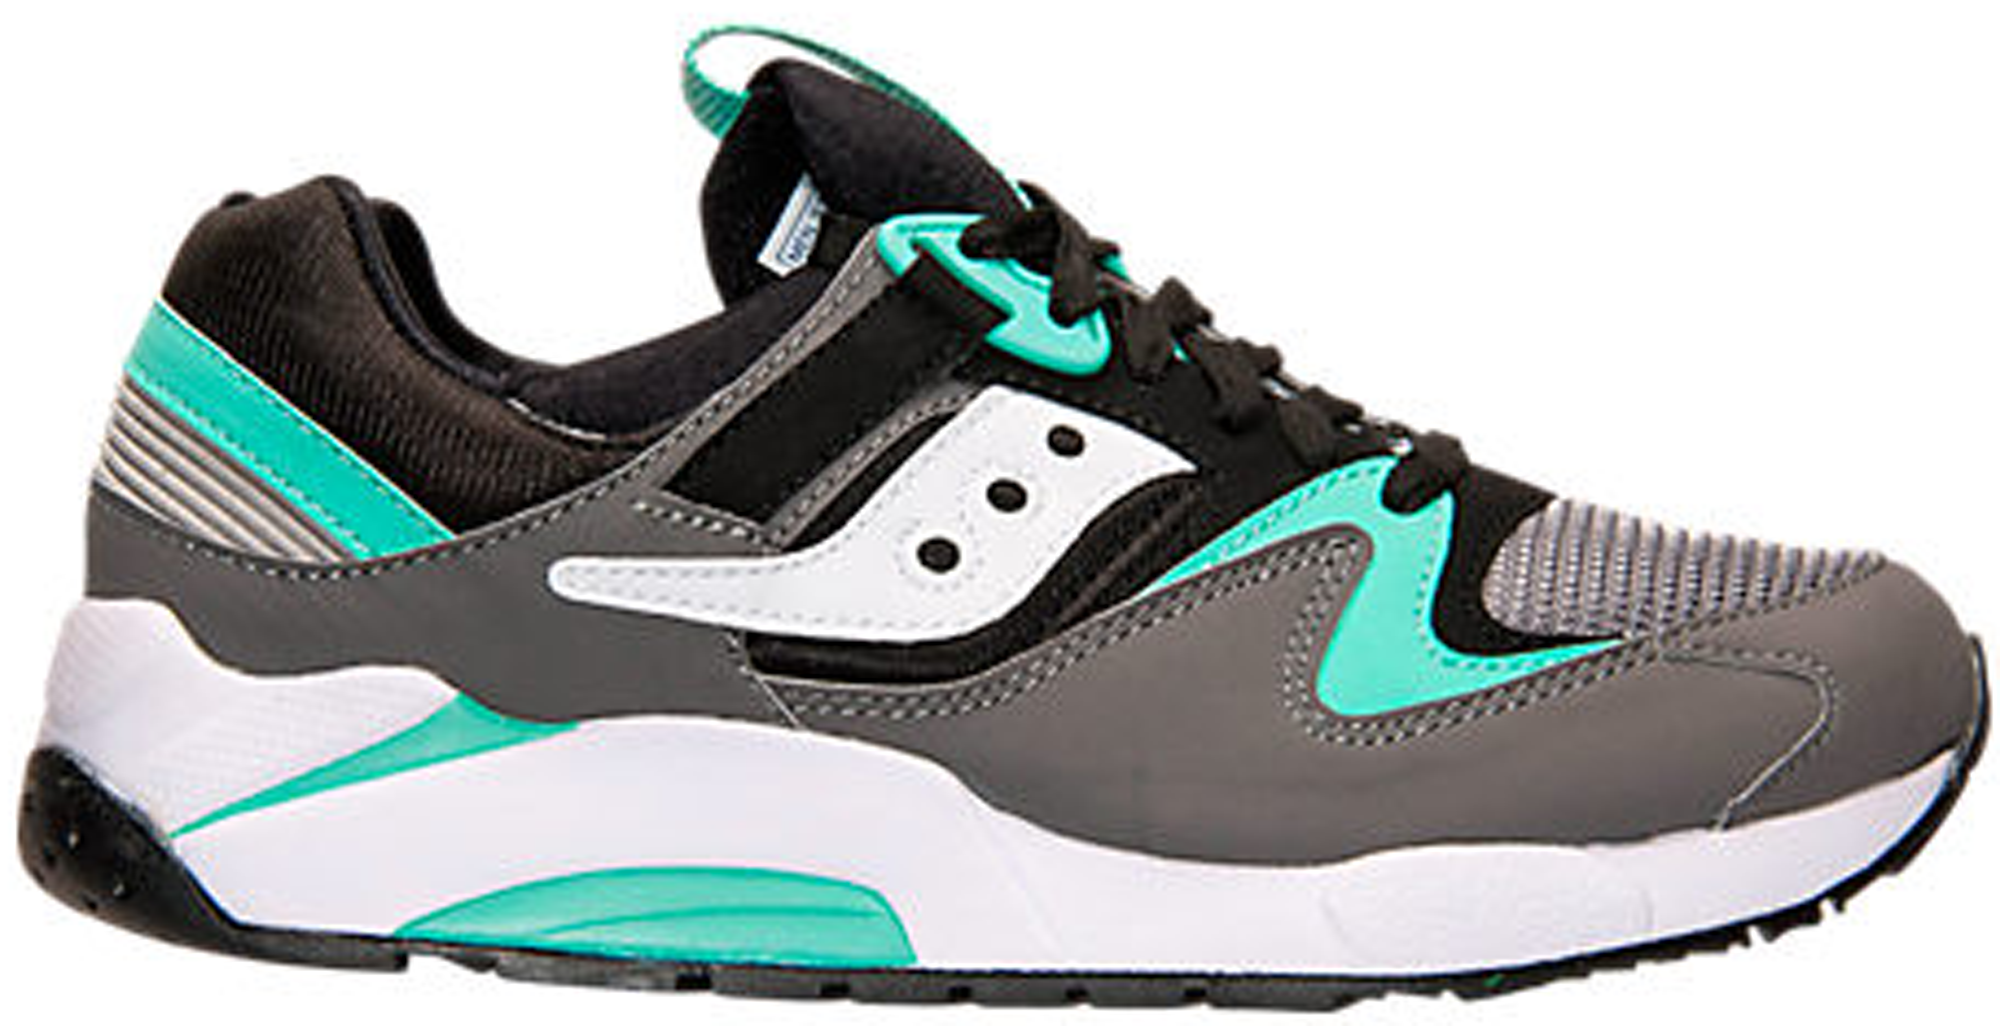 Saucony Men's Grid 9000 Athletic Running Casual Shoes S70077-30 Size 7-8.5 